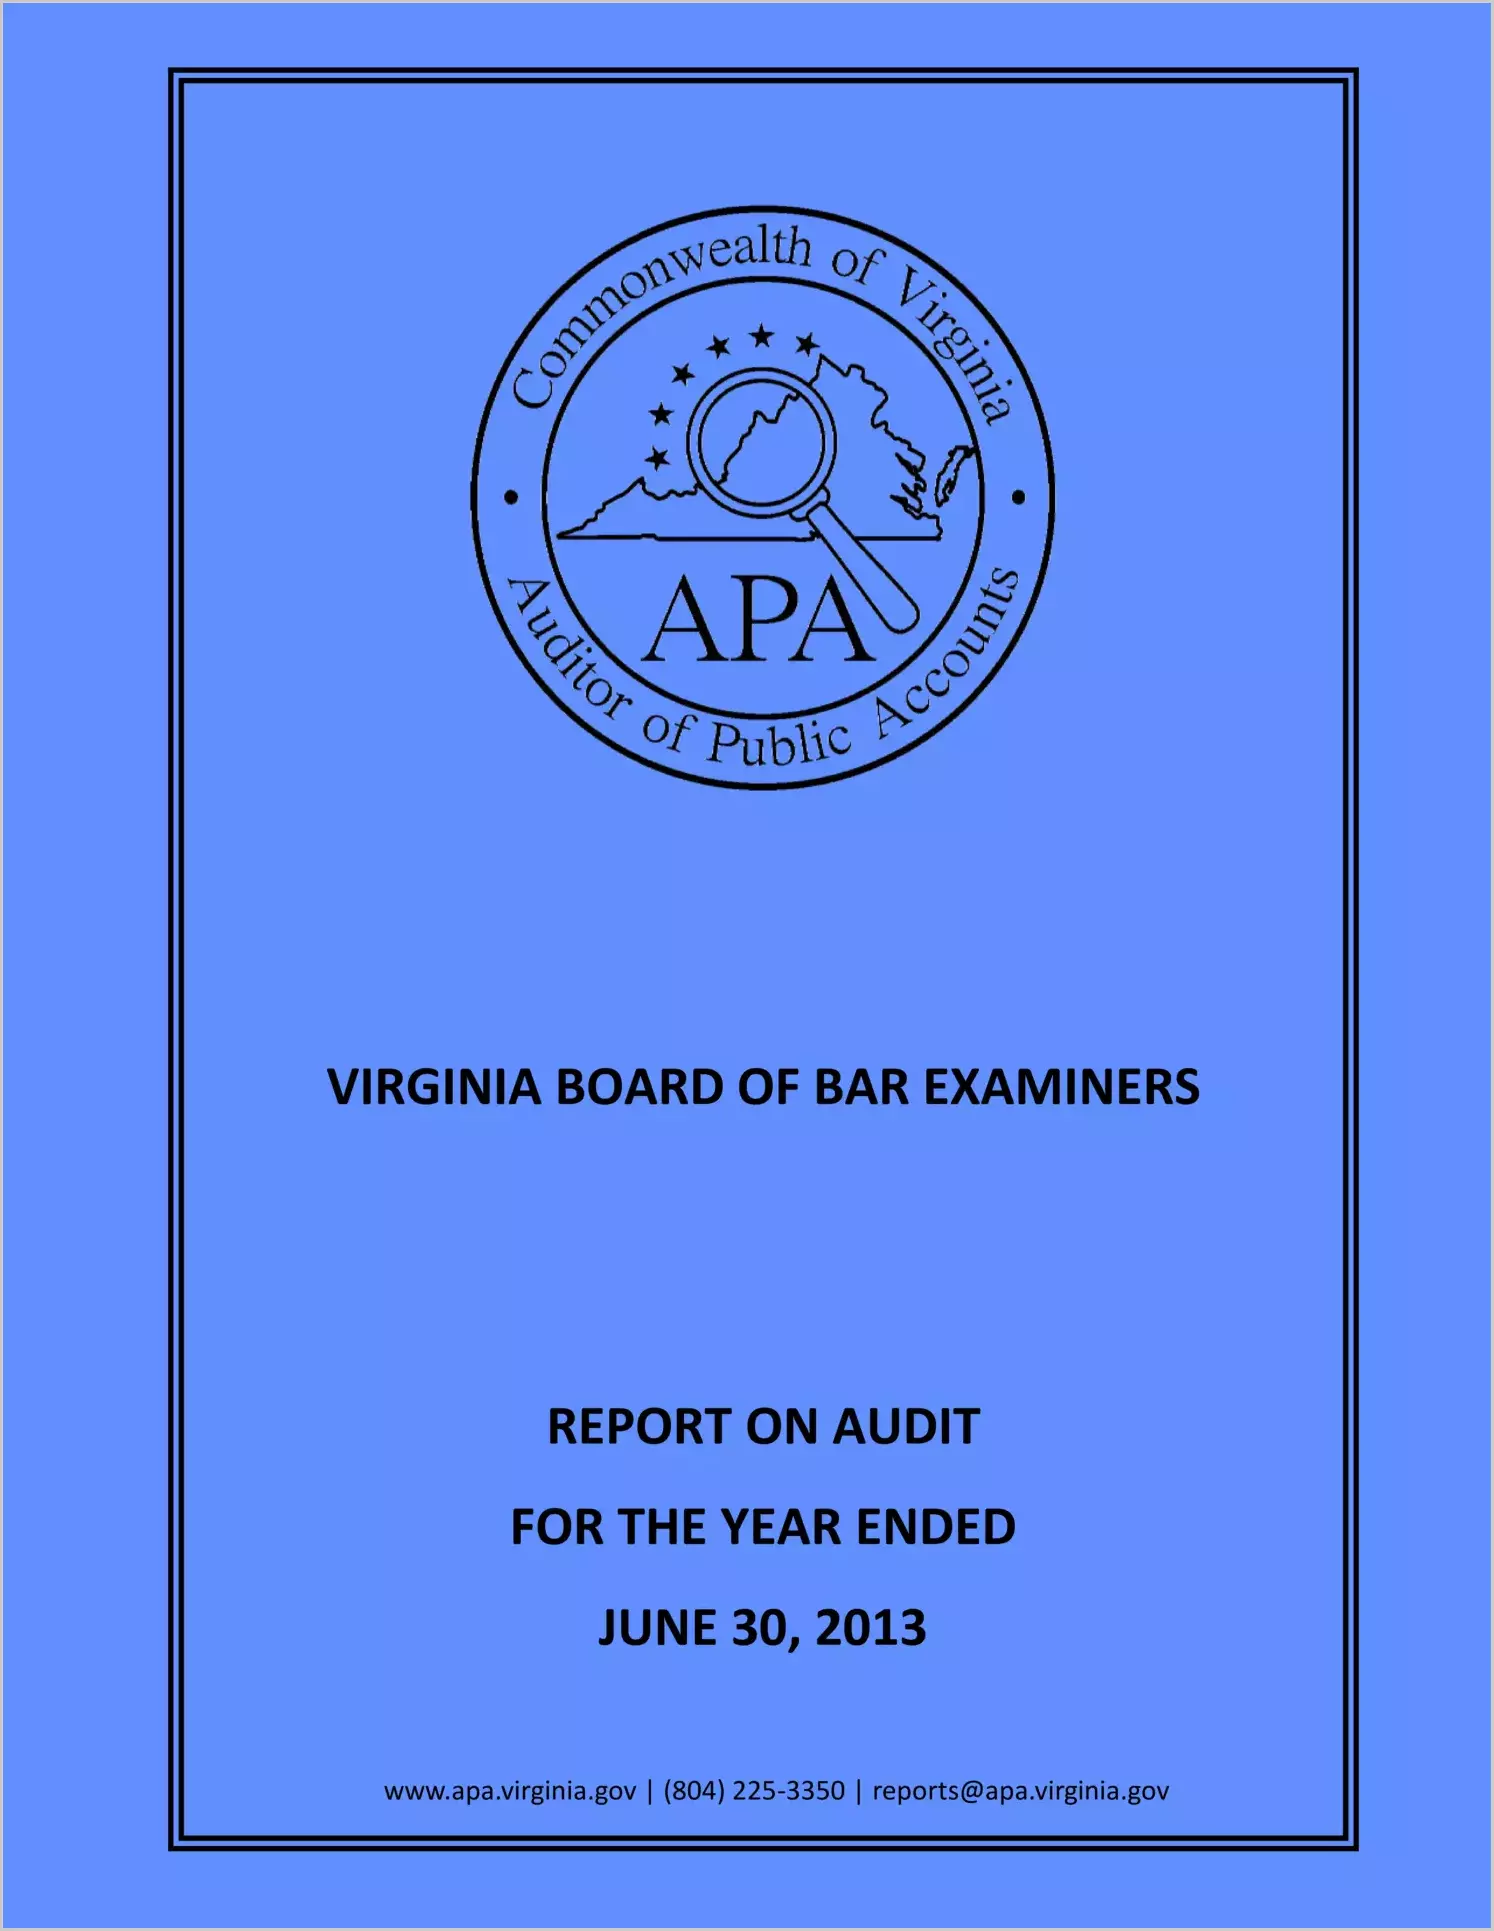 Virginia Board of Bar Examiners Report on Audit for the Year Ended June 30, 2013